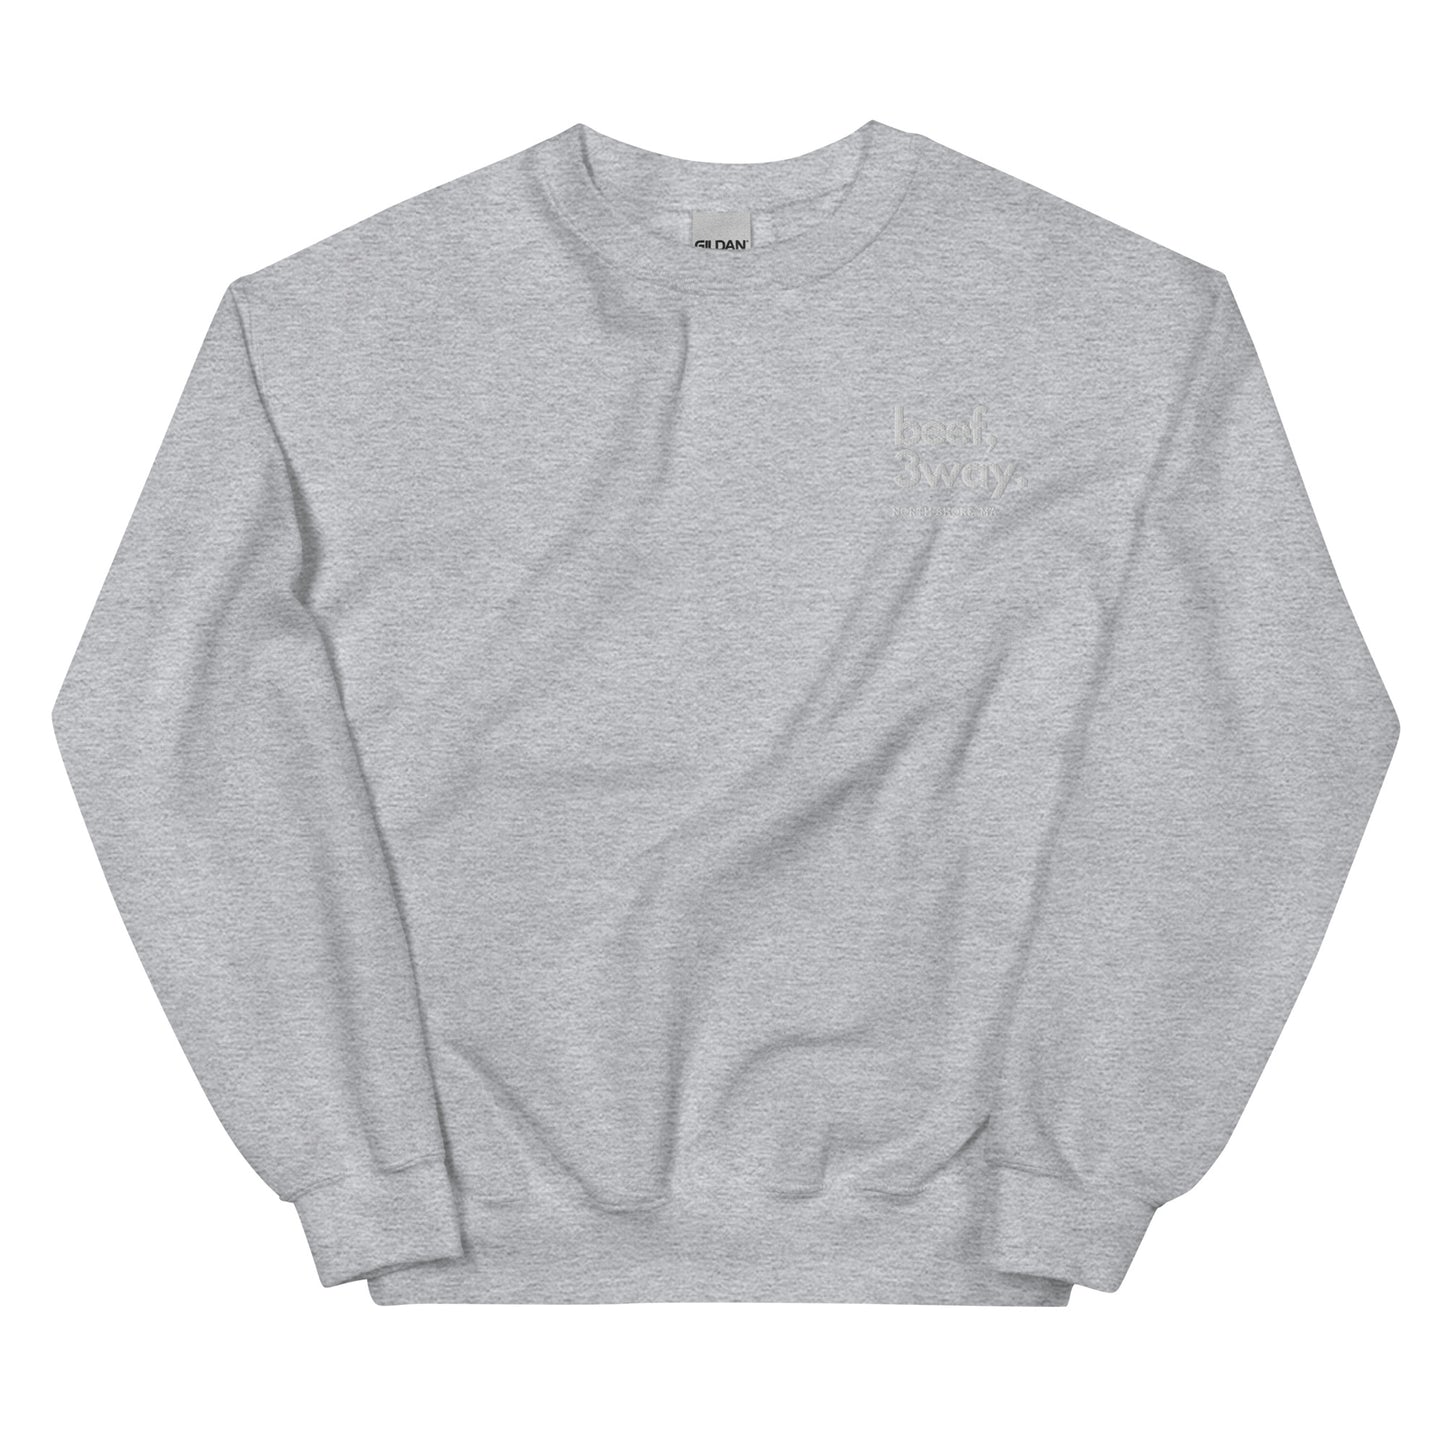 light grey crewneck that says "beef, 3way north shore ma" in white lettering